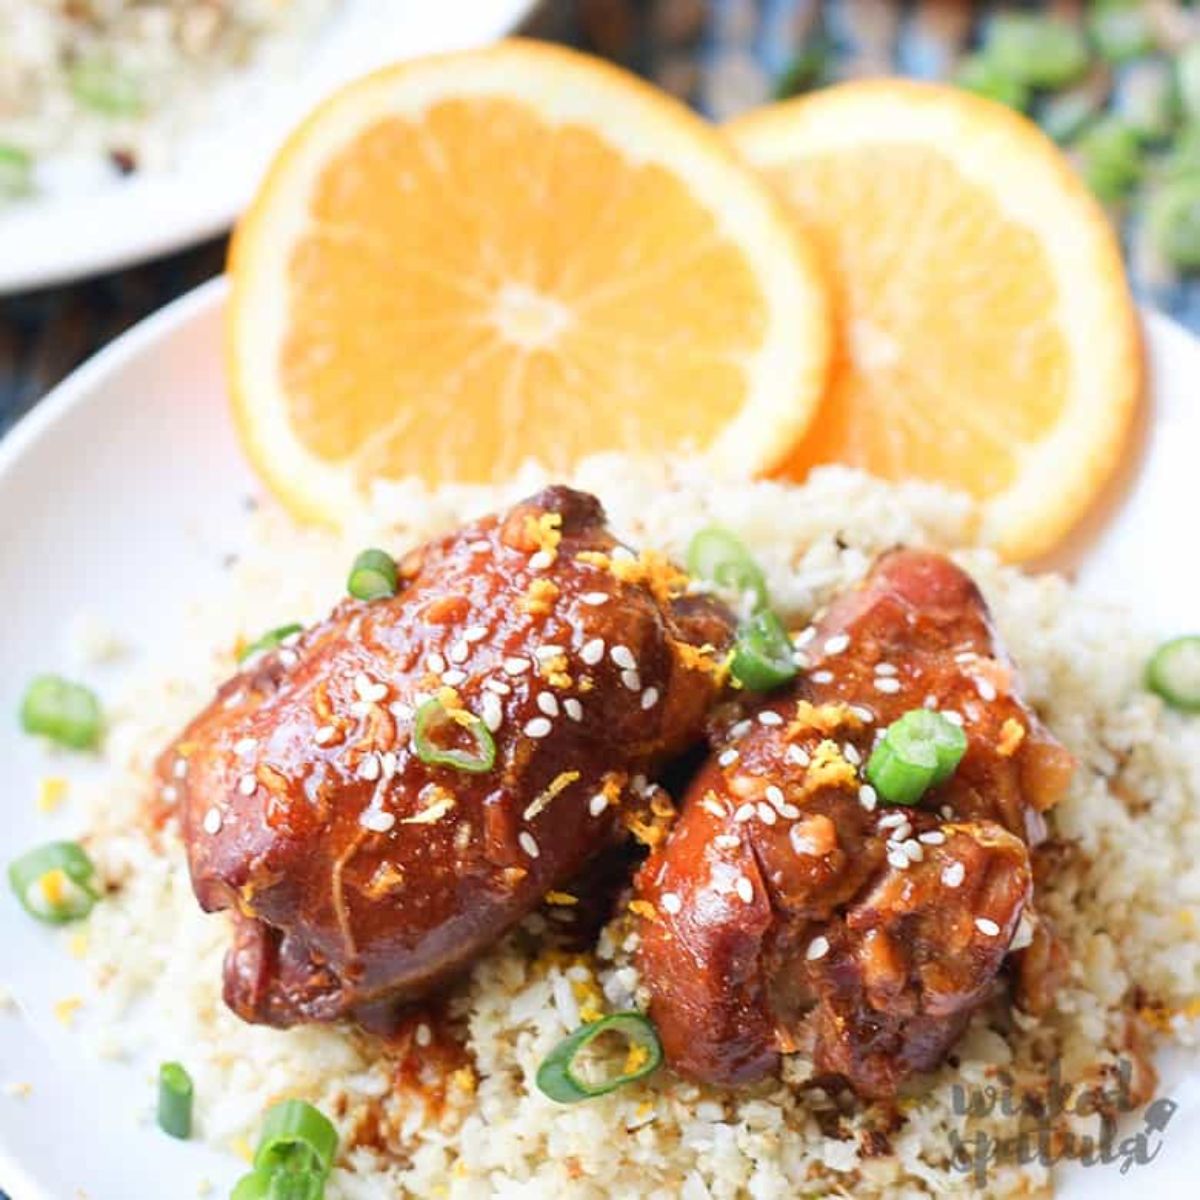 a plate of marinaded chicken thighs, on a bed of cauliflower rice garnished with sliced scallions, sesame seeds and orange slices